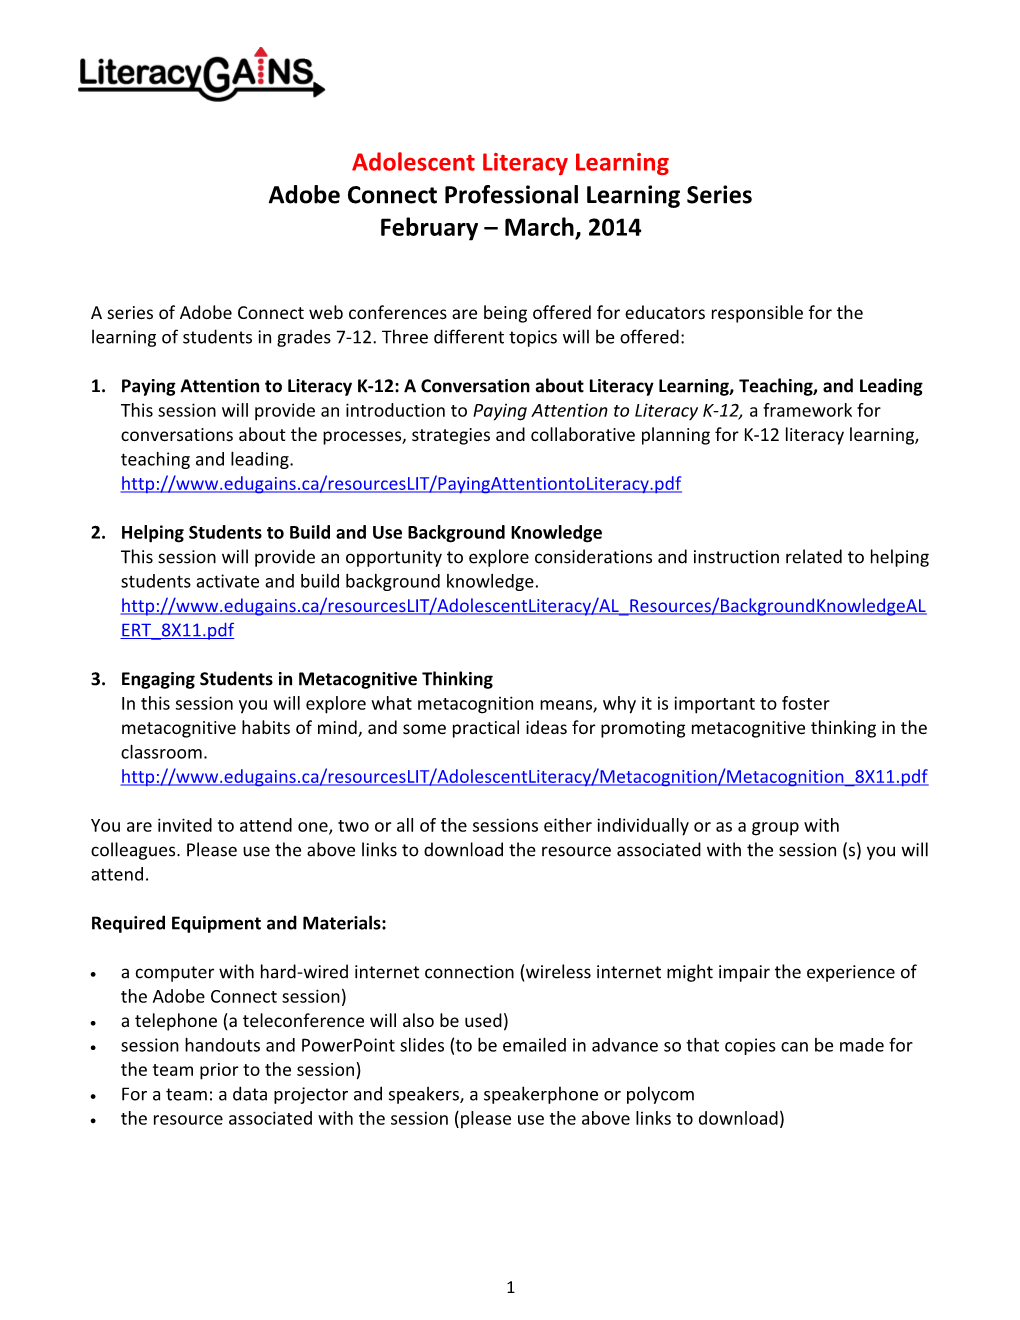 Adobe Connect Professional Learning Series